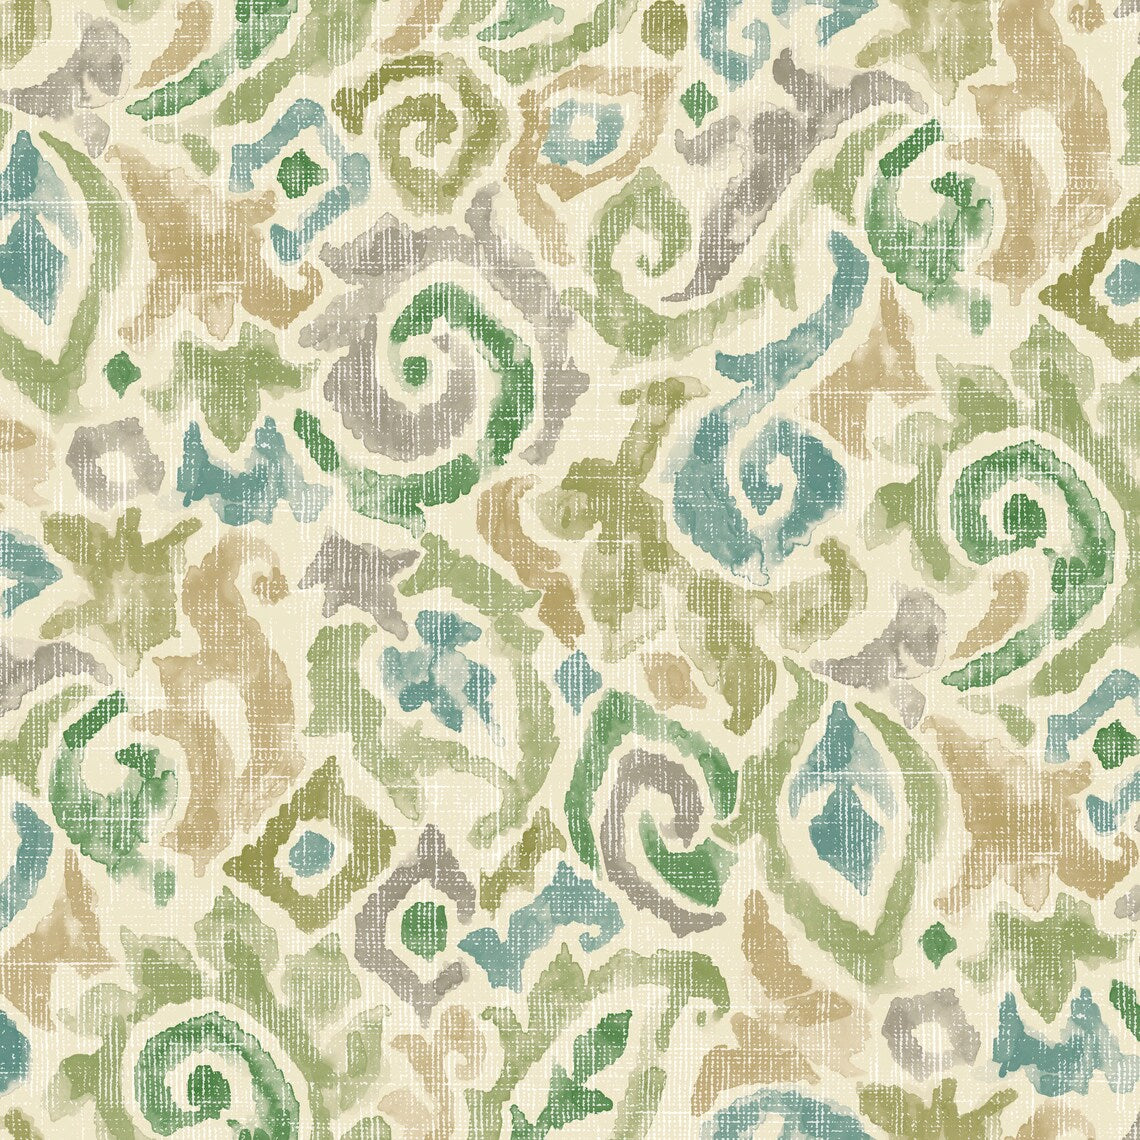 pillow sham in Jester Bay Green Paisley Watercolor